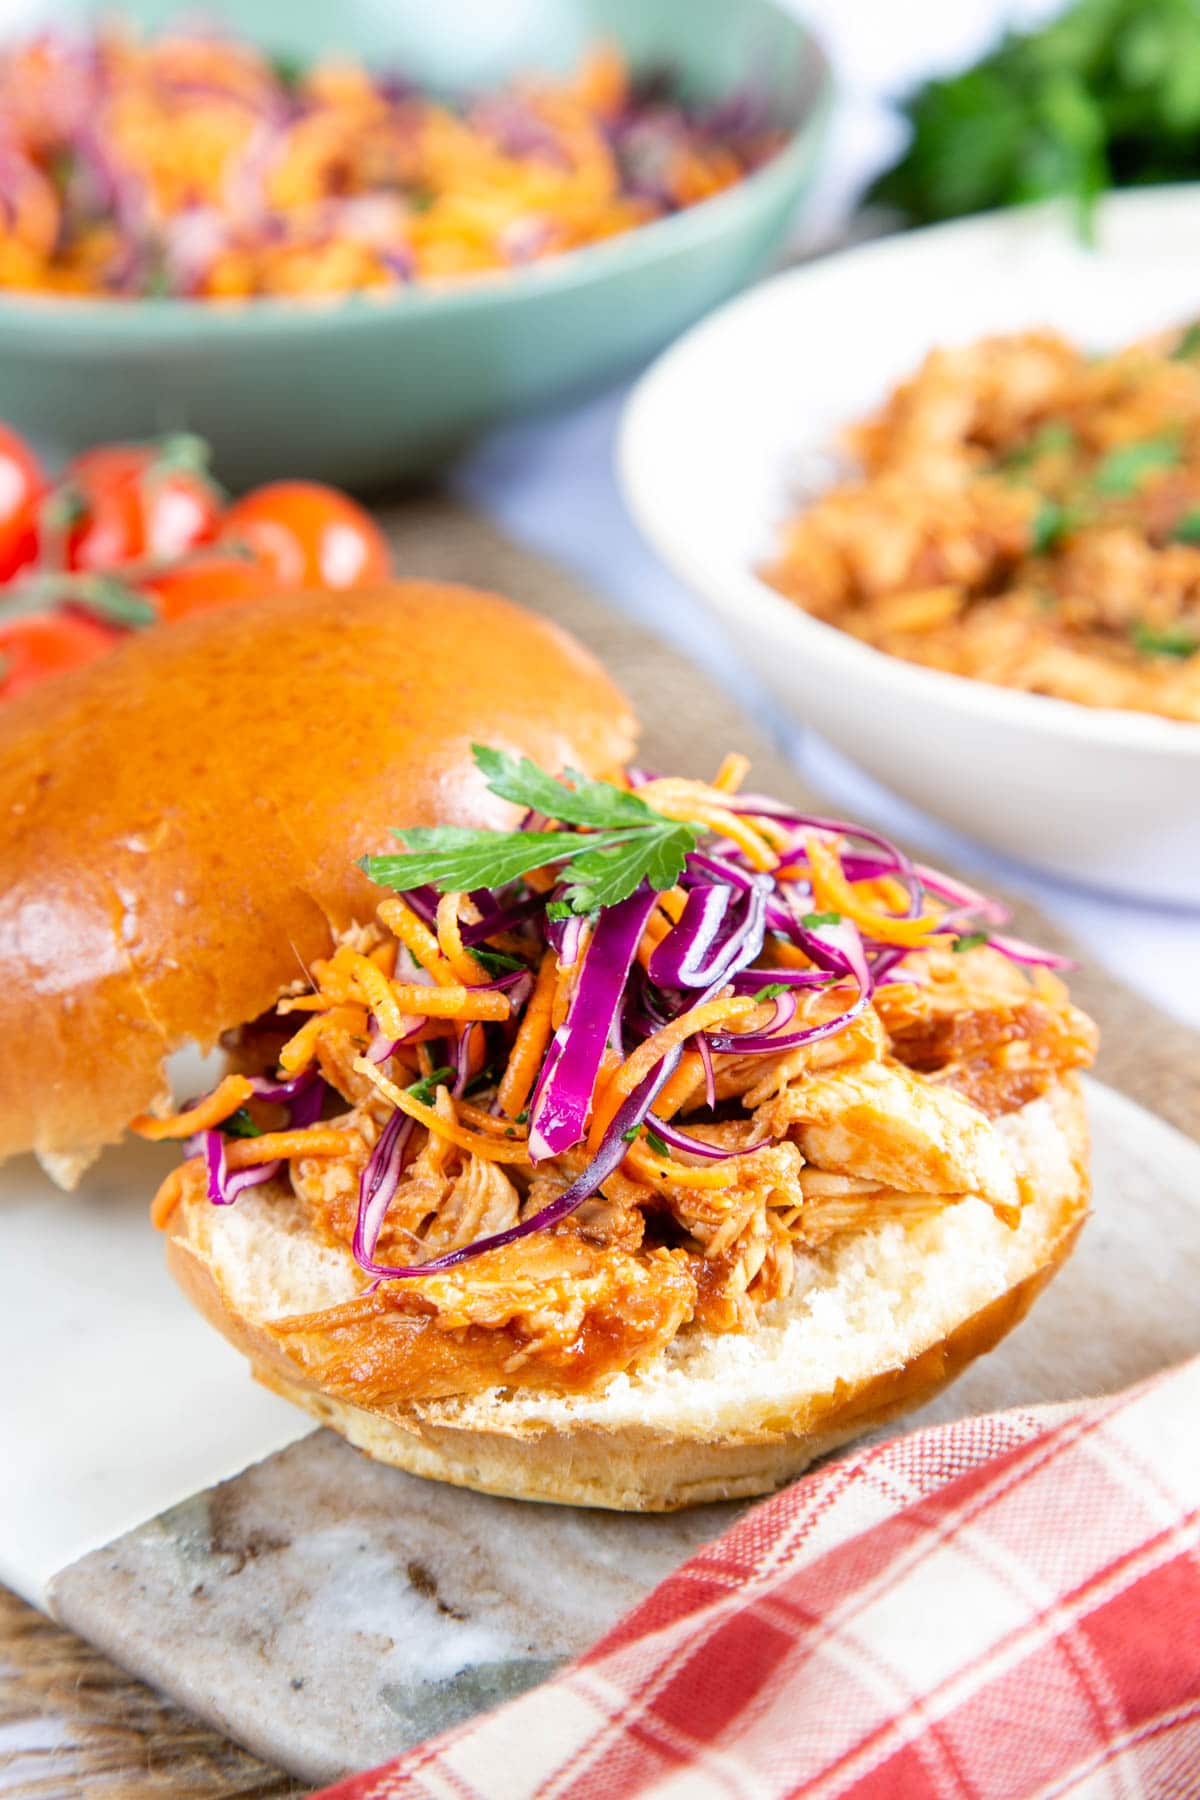 A close up of a burger bun piled with delicious BBQ slow cooked chicken, topped with red cabbage and carrot coleslaw. The bun is presented on a marble board.